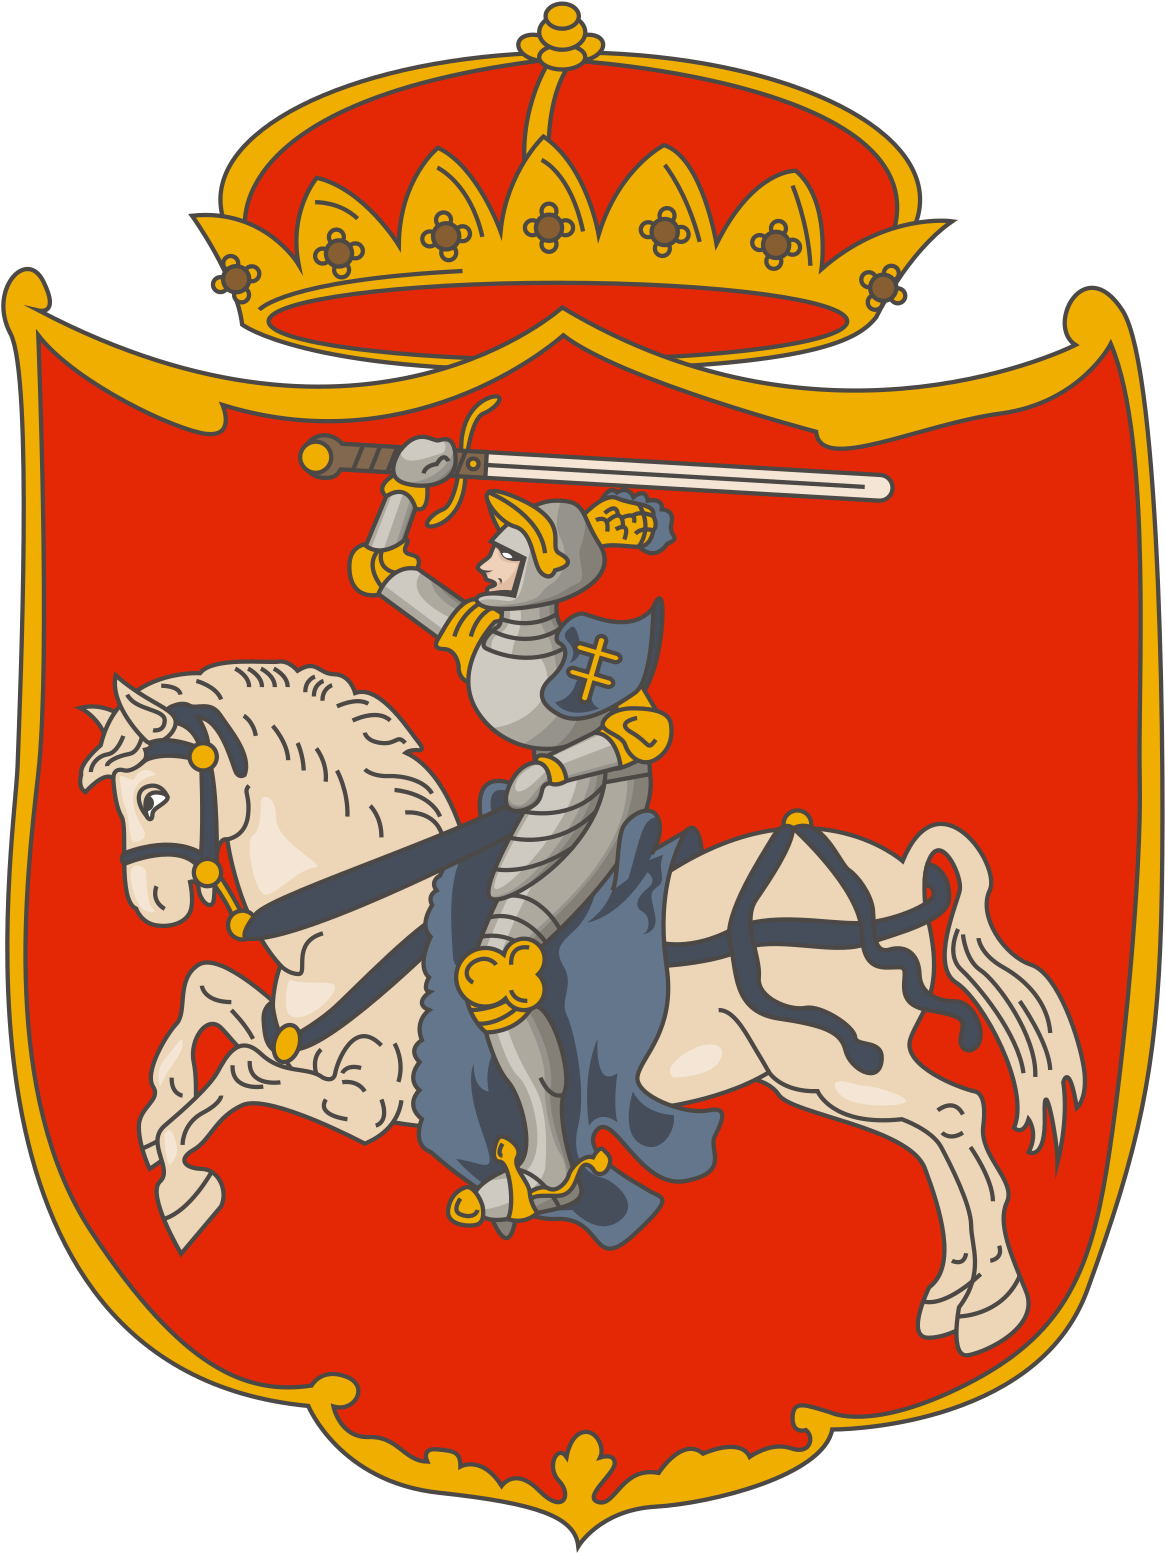 A Red Shield With A Knight On A Horse And A Crown